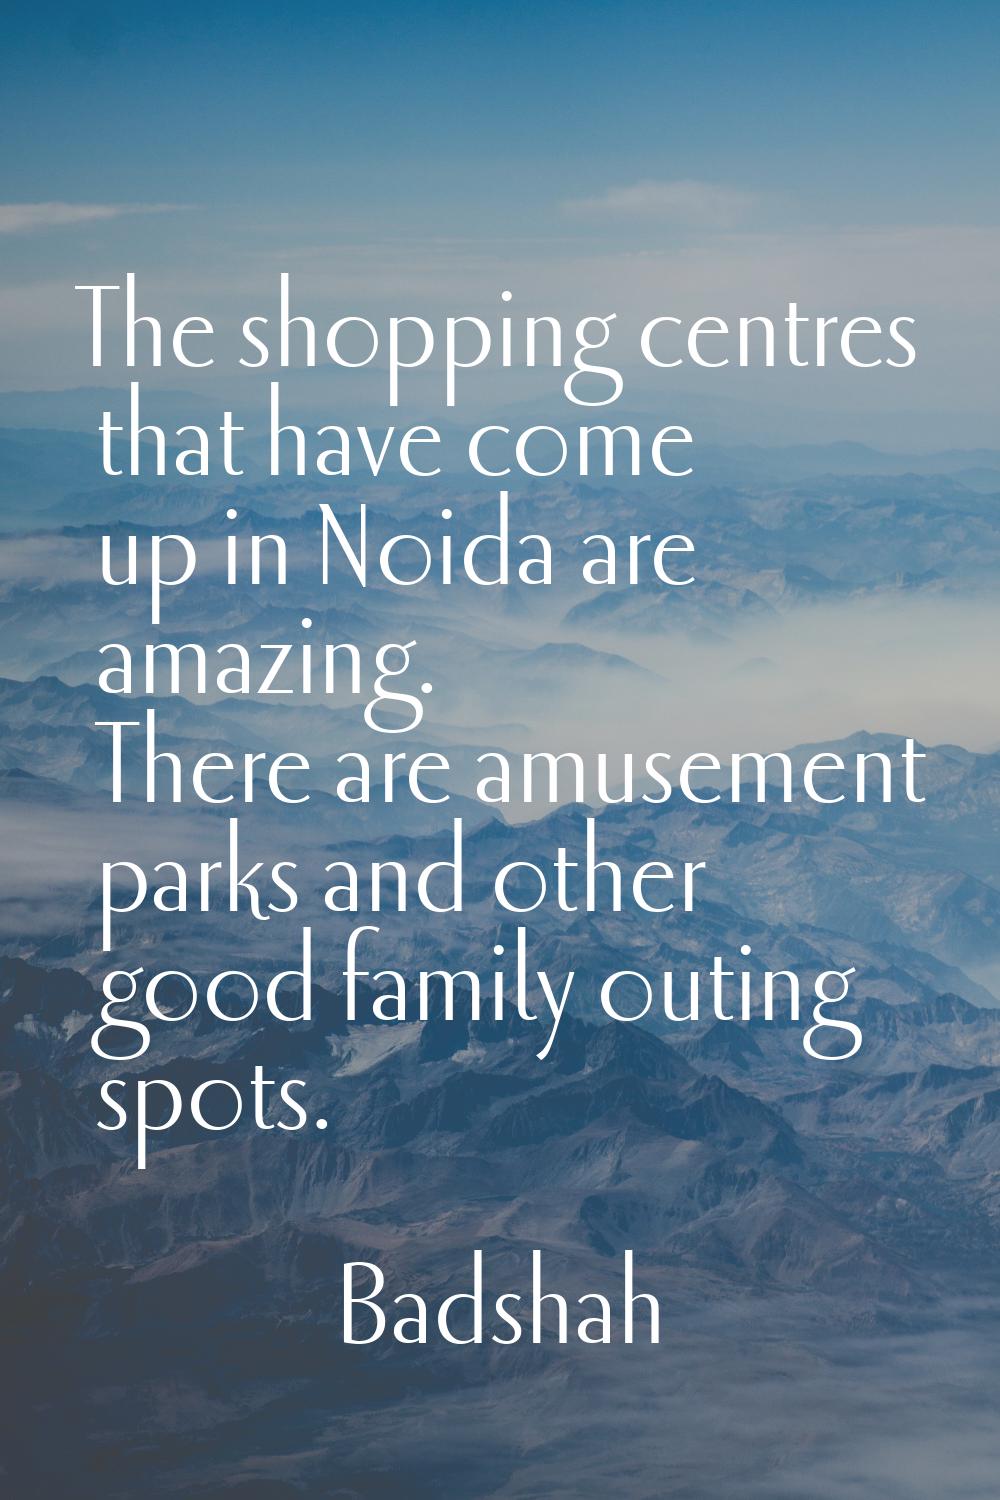 The shopping centres that have come up in Noida are amazing. There are amusement parks and other go